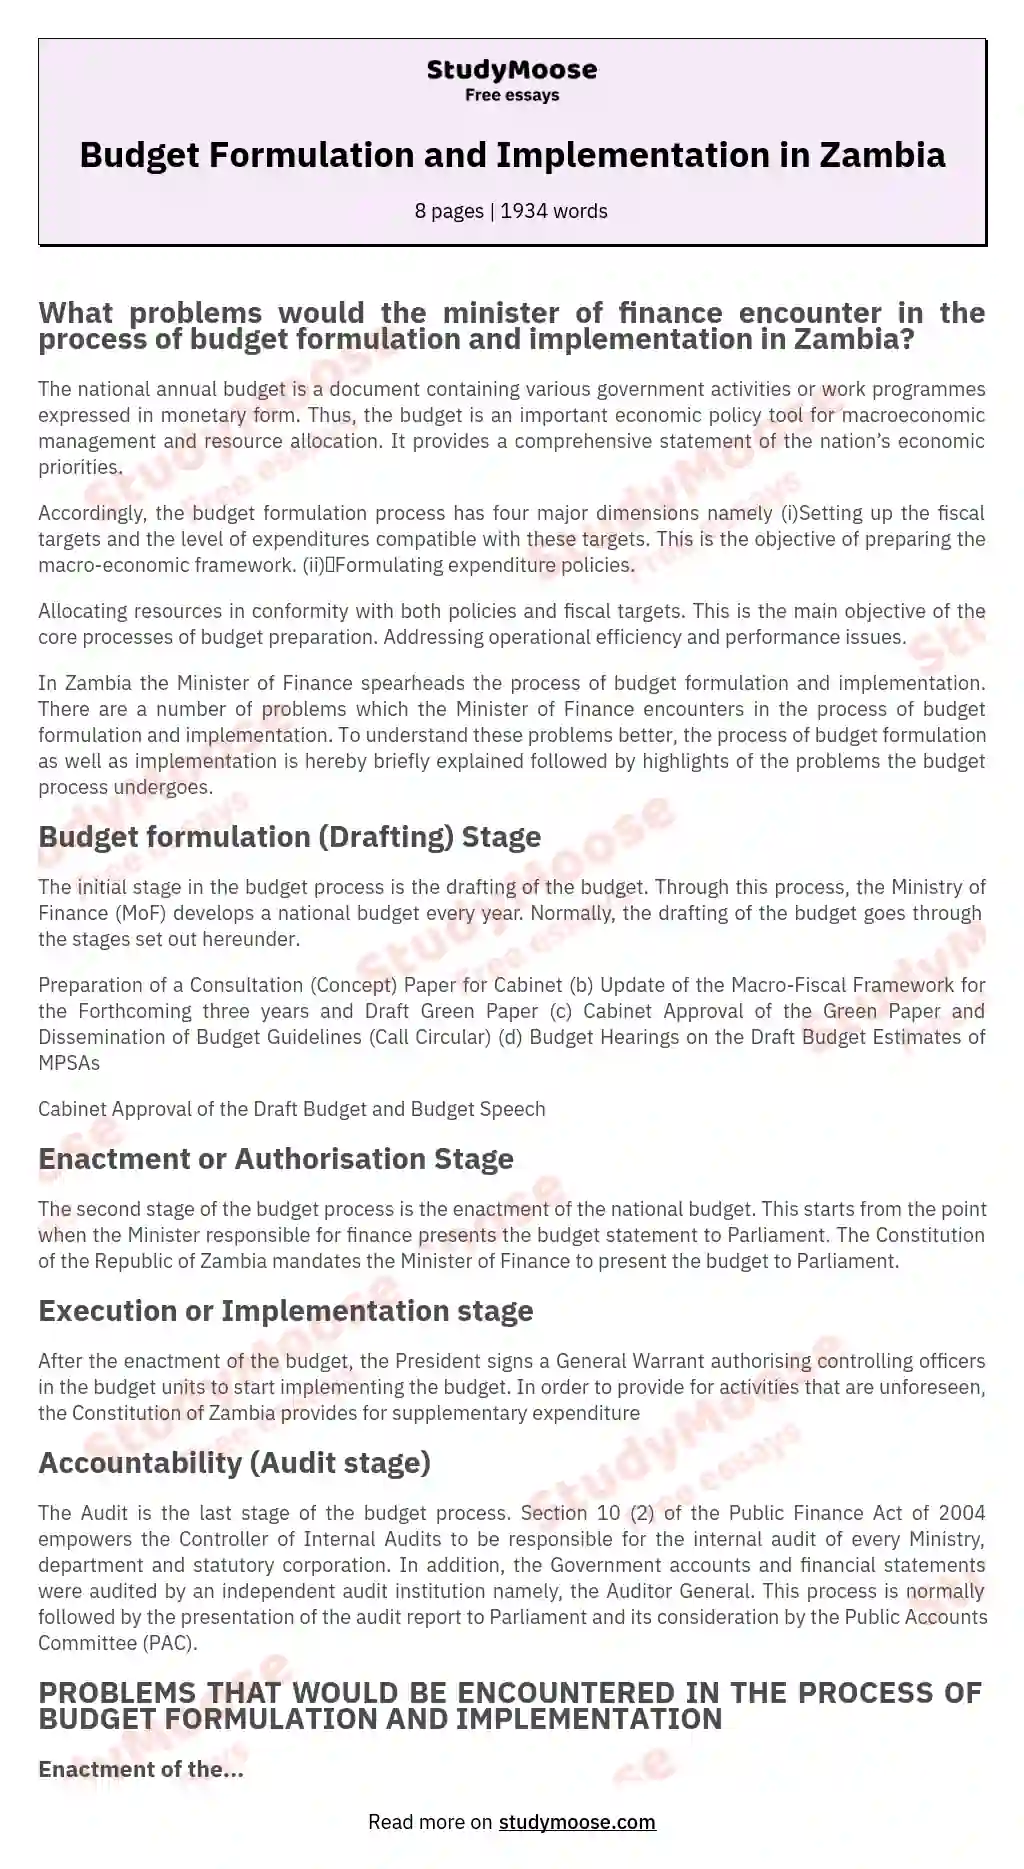 Budget Formulation and Implementation in Zambia essay